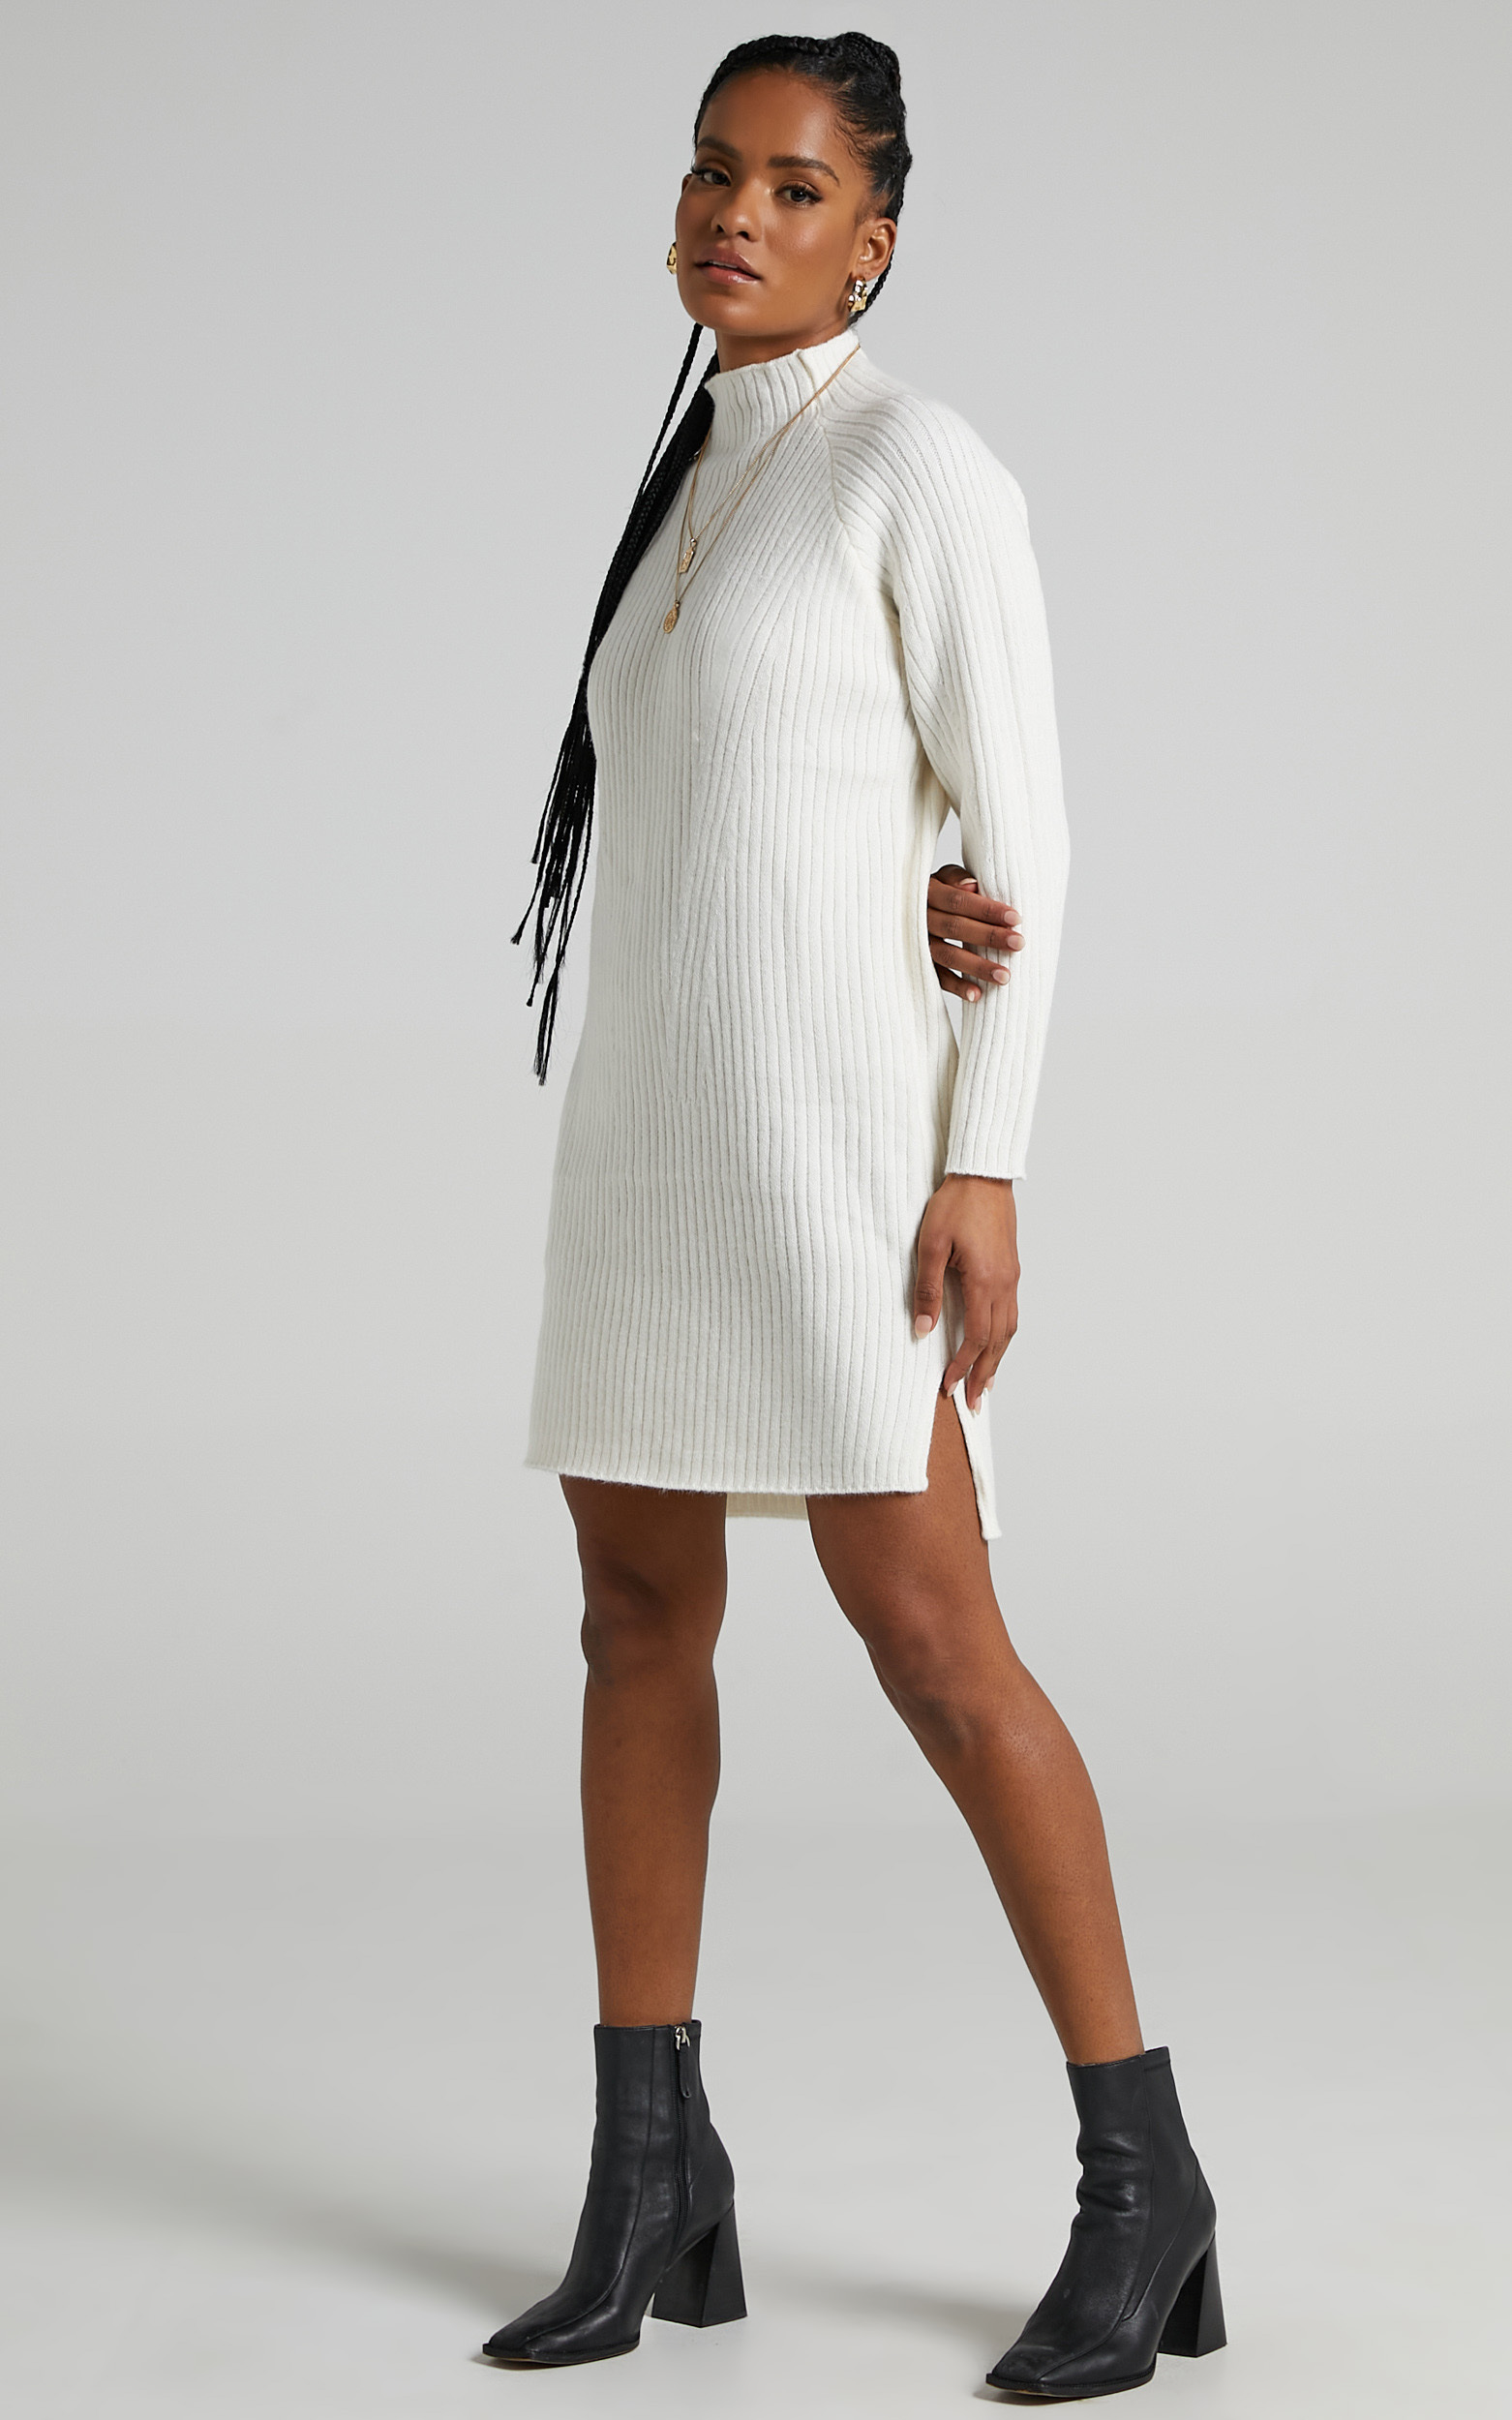 Shantelle Knit Dress in Cream - L/XL, CRE1, hi-res image number null